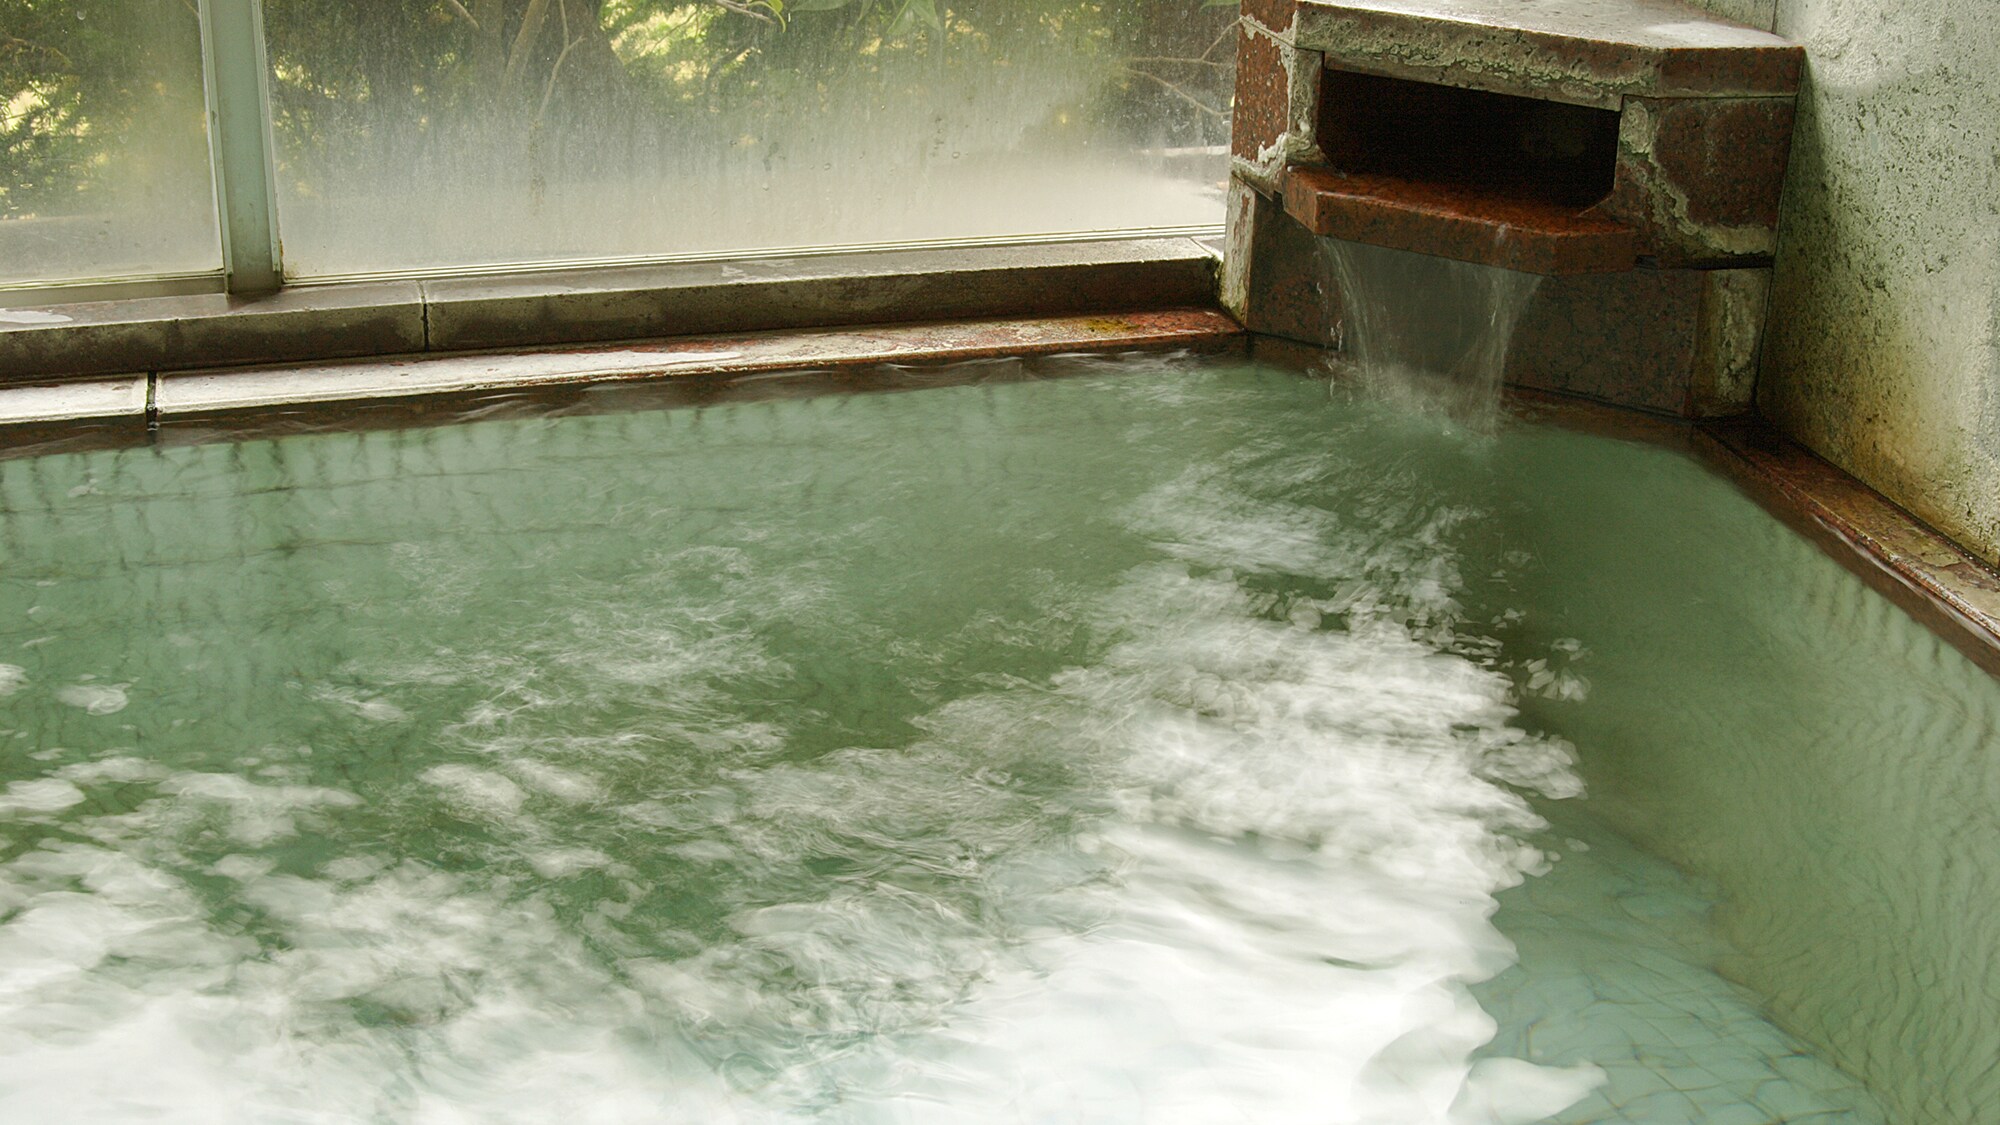 * Enjoy Kakeyu Onsen, which is said to be good for hot springs, in a luxurious manner.